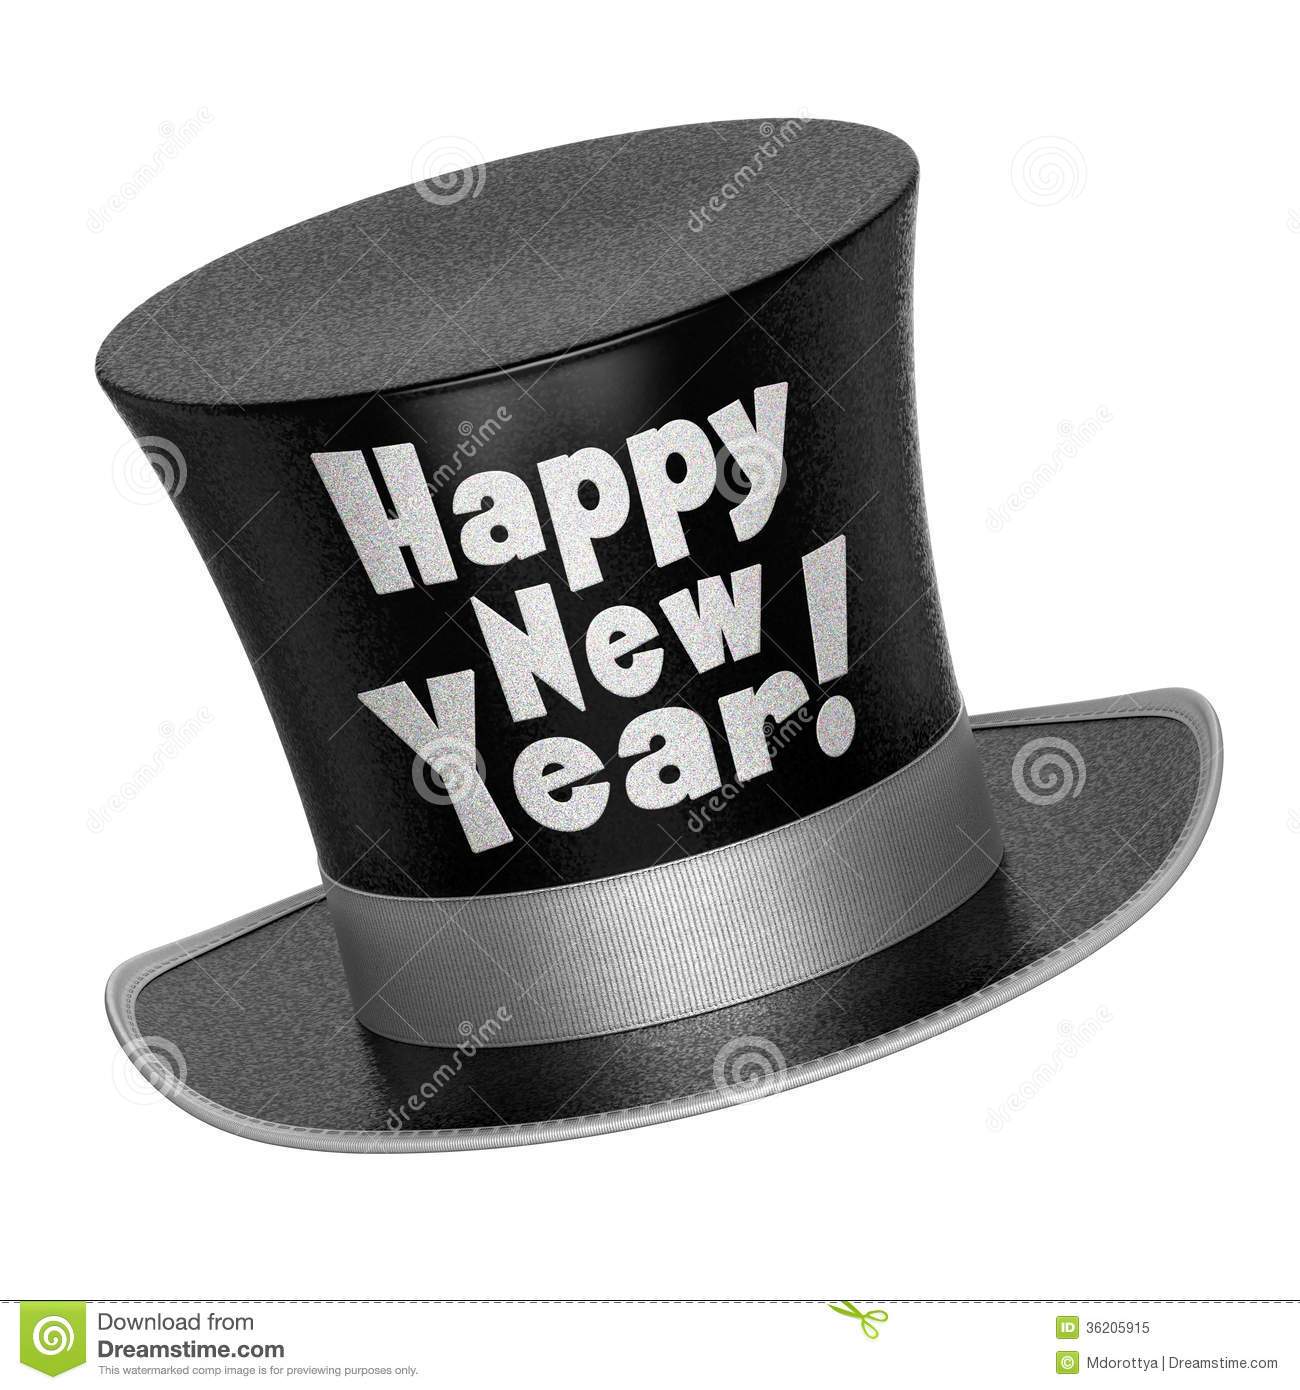 New years eve hat clipart 3 » Clipart Portal.